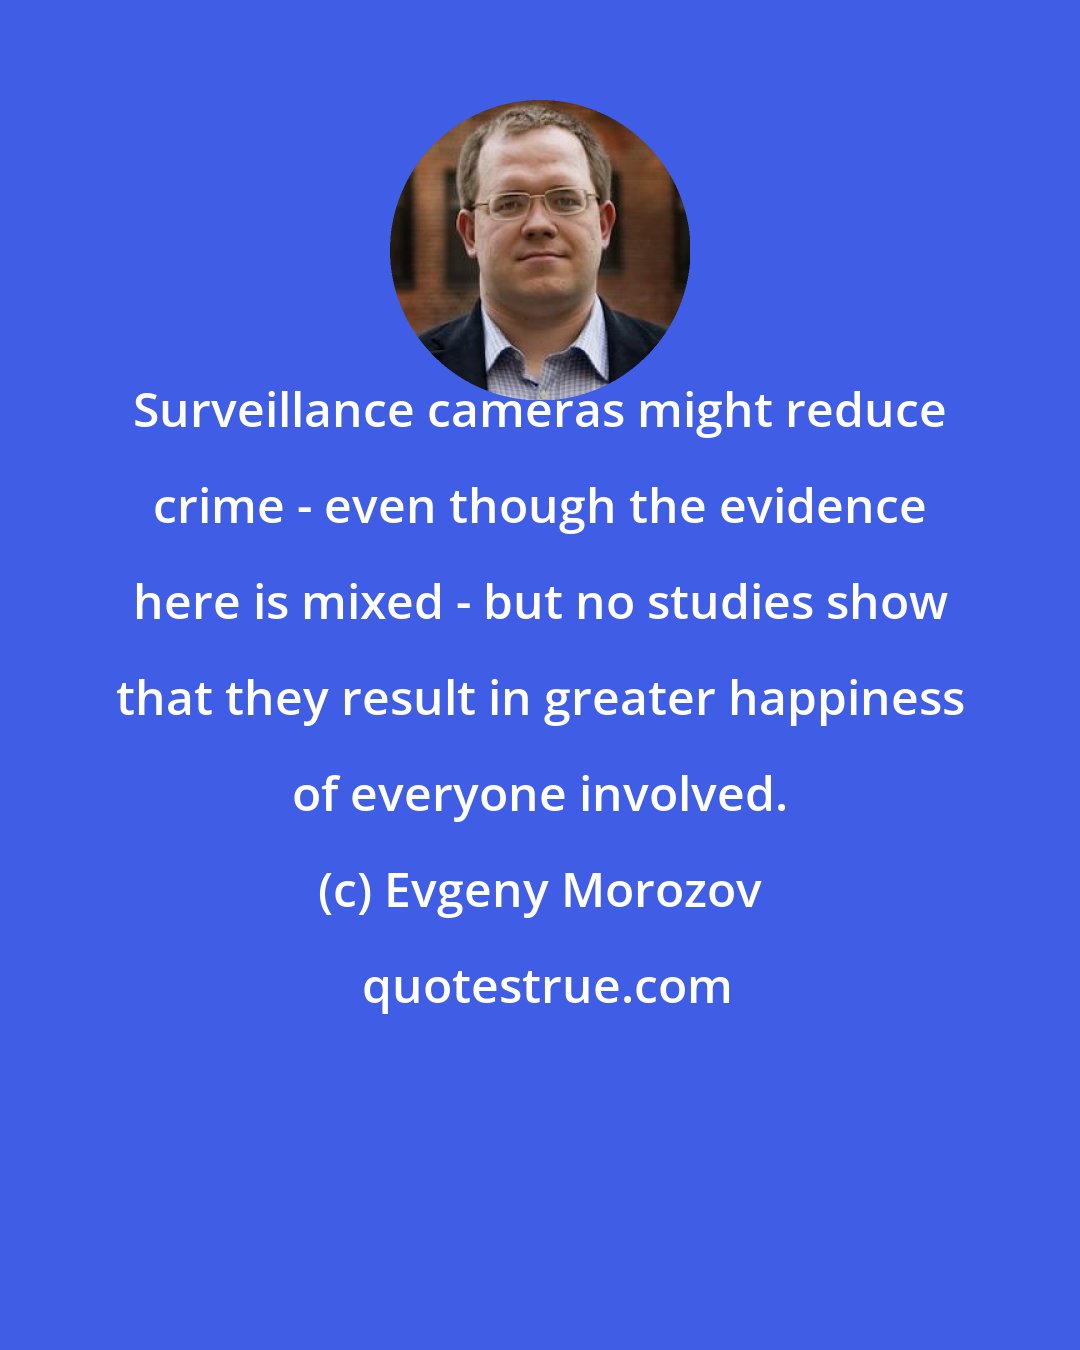 Evgeny Morozov: Surveillance cameras might reduce crime - even though the evidence here is mixed - but no studies show that they result in greater happiness of everyone involved.